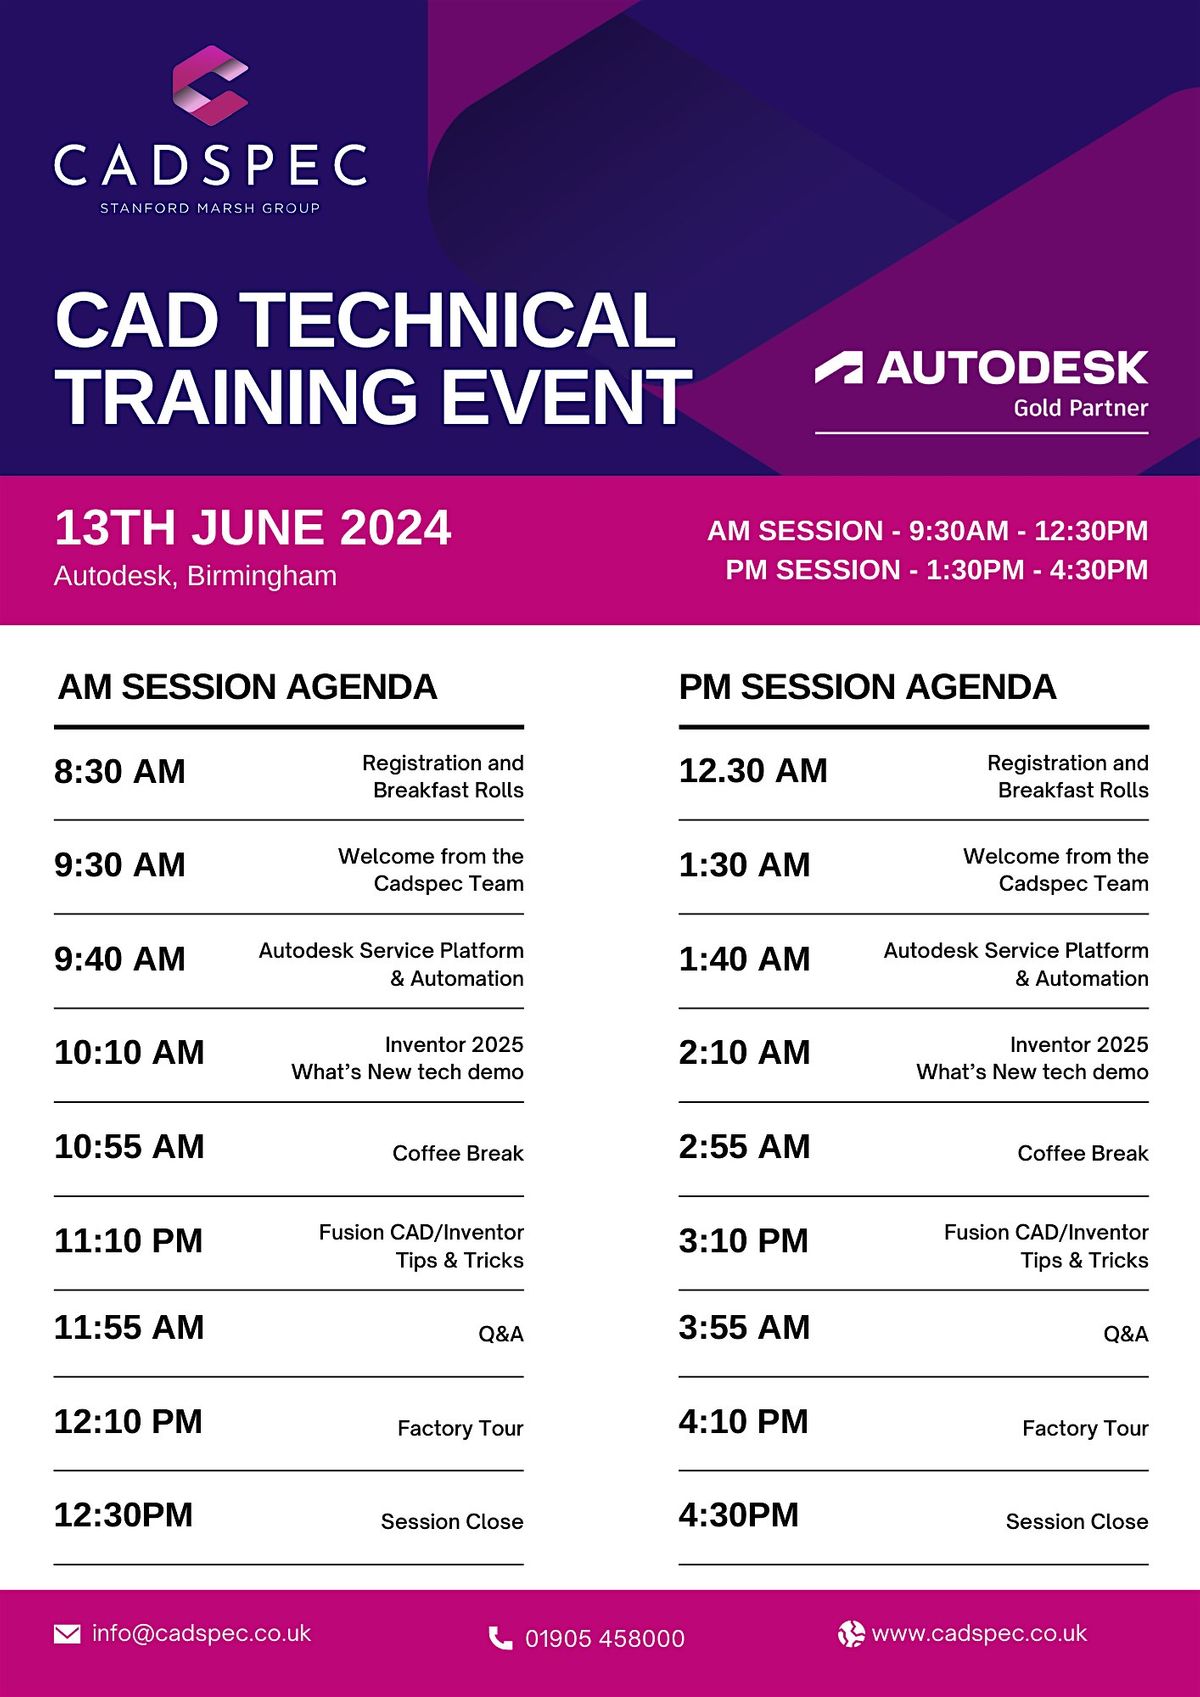 CAD technical Training Event - PM Session